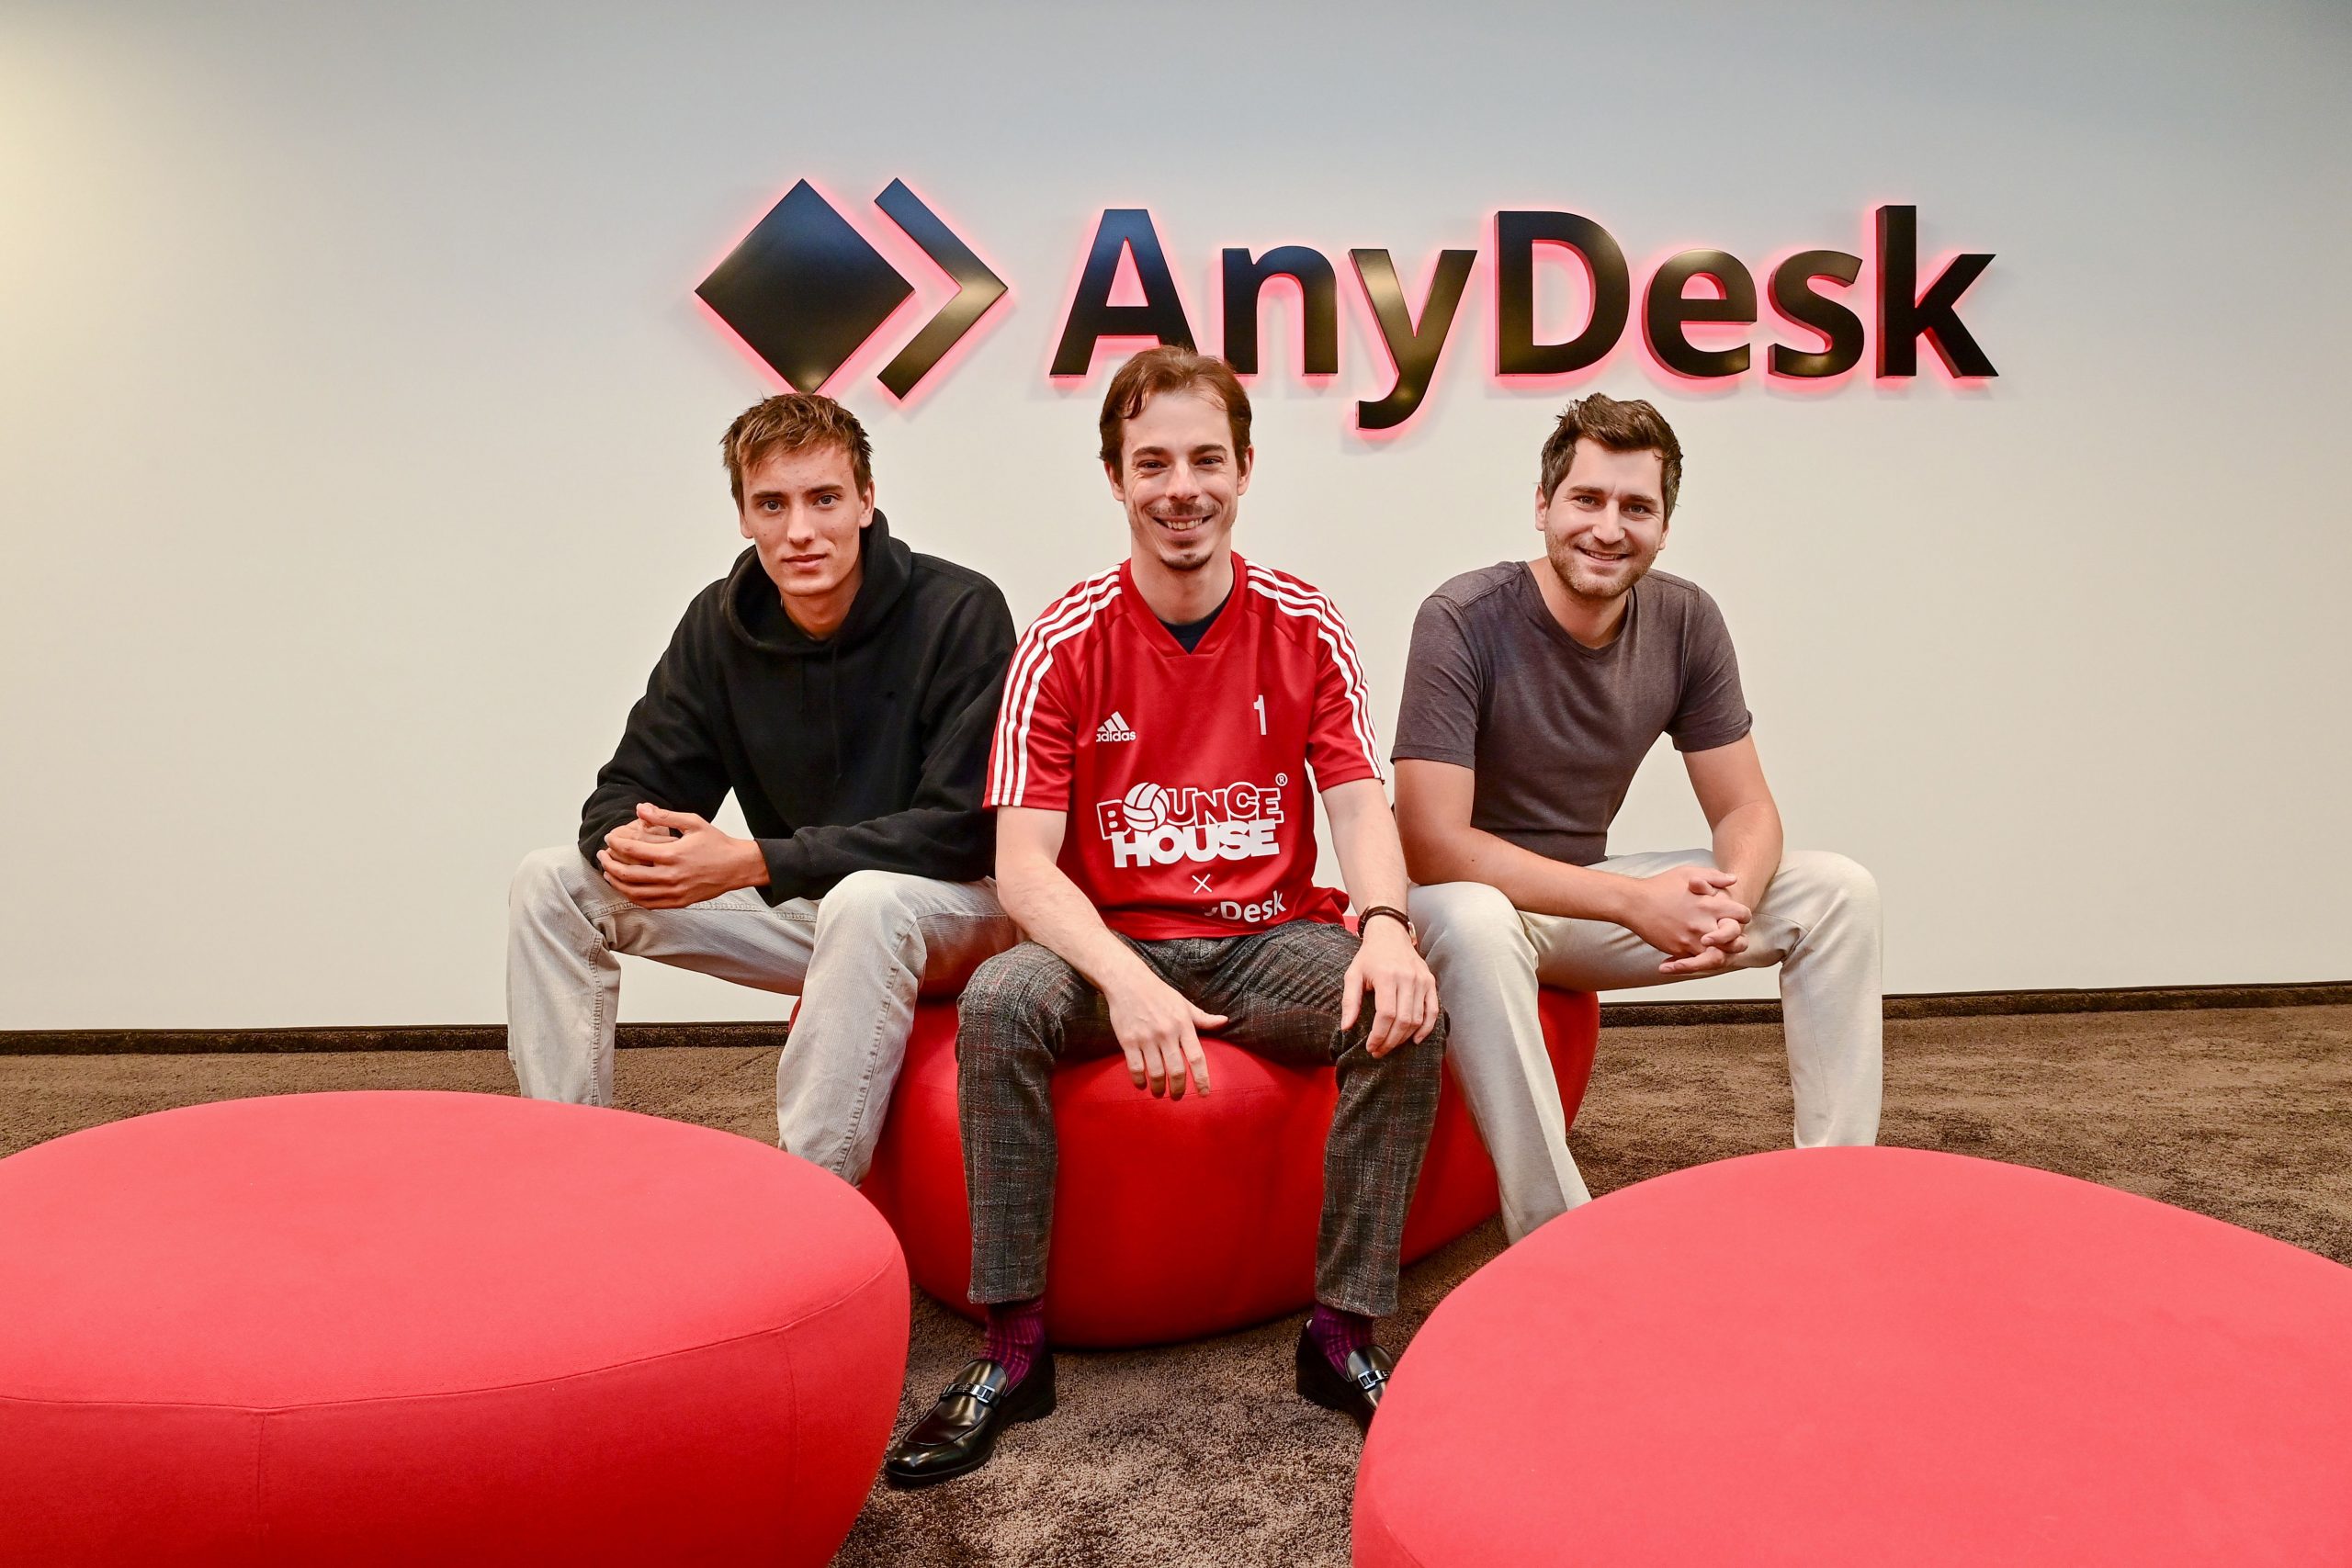 German Mens Professional Volleyball League opts for interactive streaming and chooses AnyDesk as their technology partner